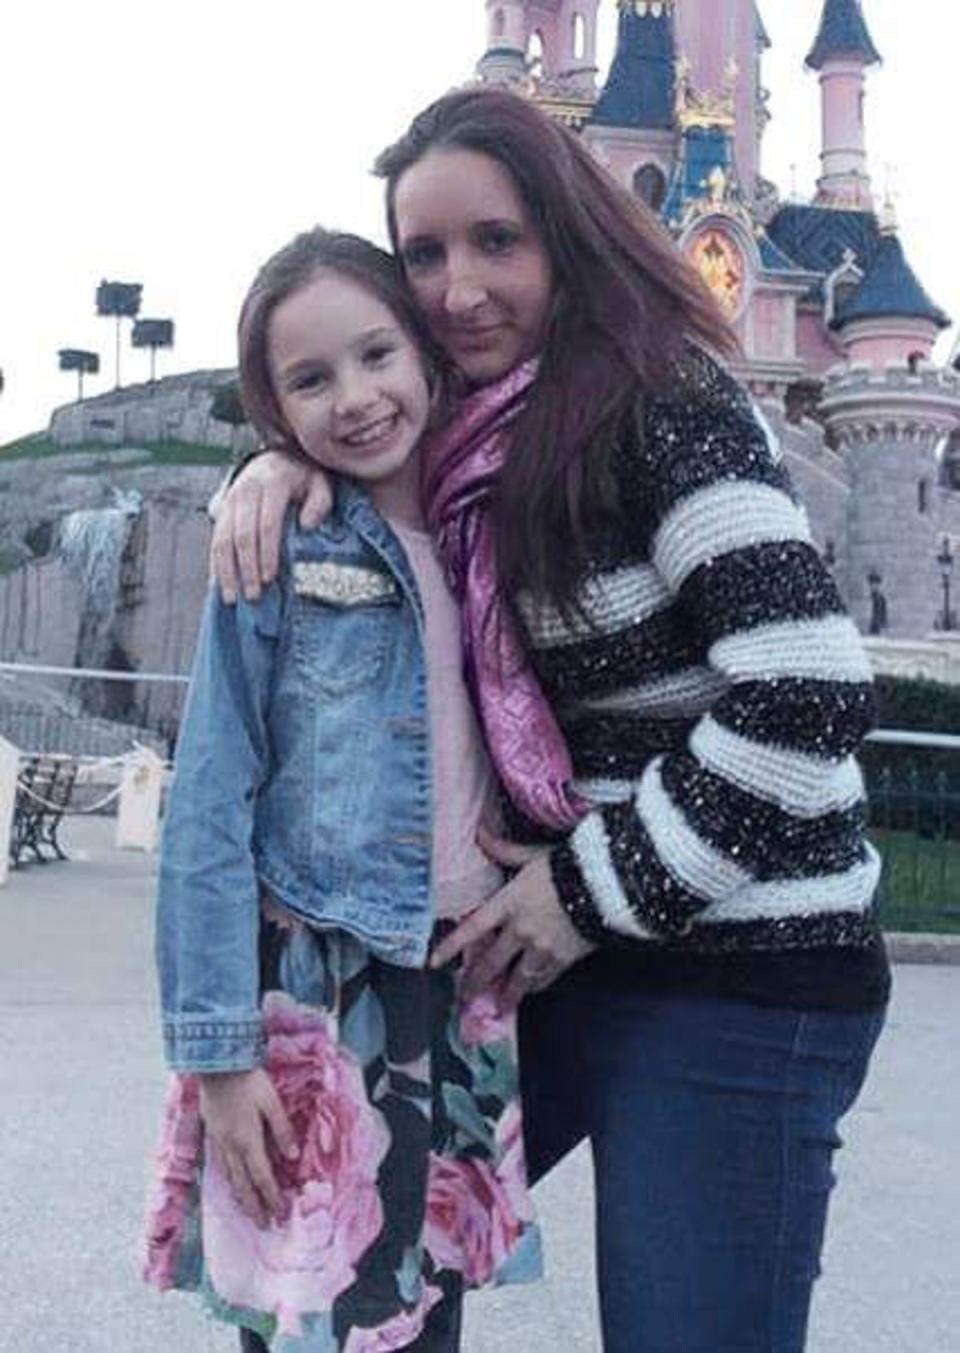 Laura Mortimer and her daughter Ella Dalby were stabbed 42 times at their home in Gloucester in May 2018 by Mortimer’s partner (Hilary Stinchcombe)